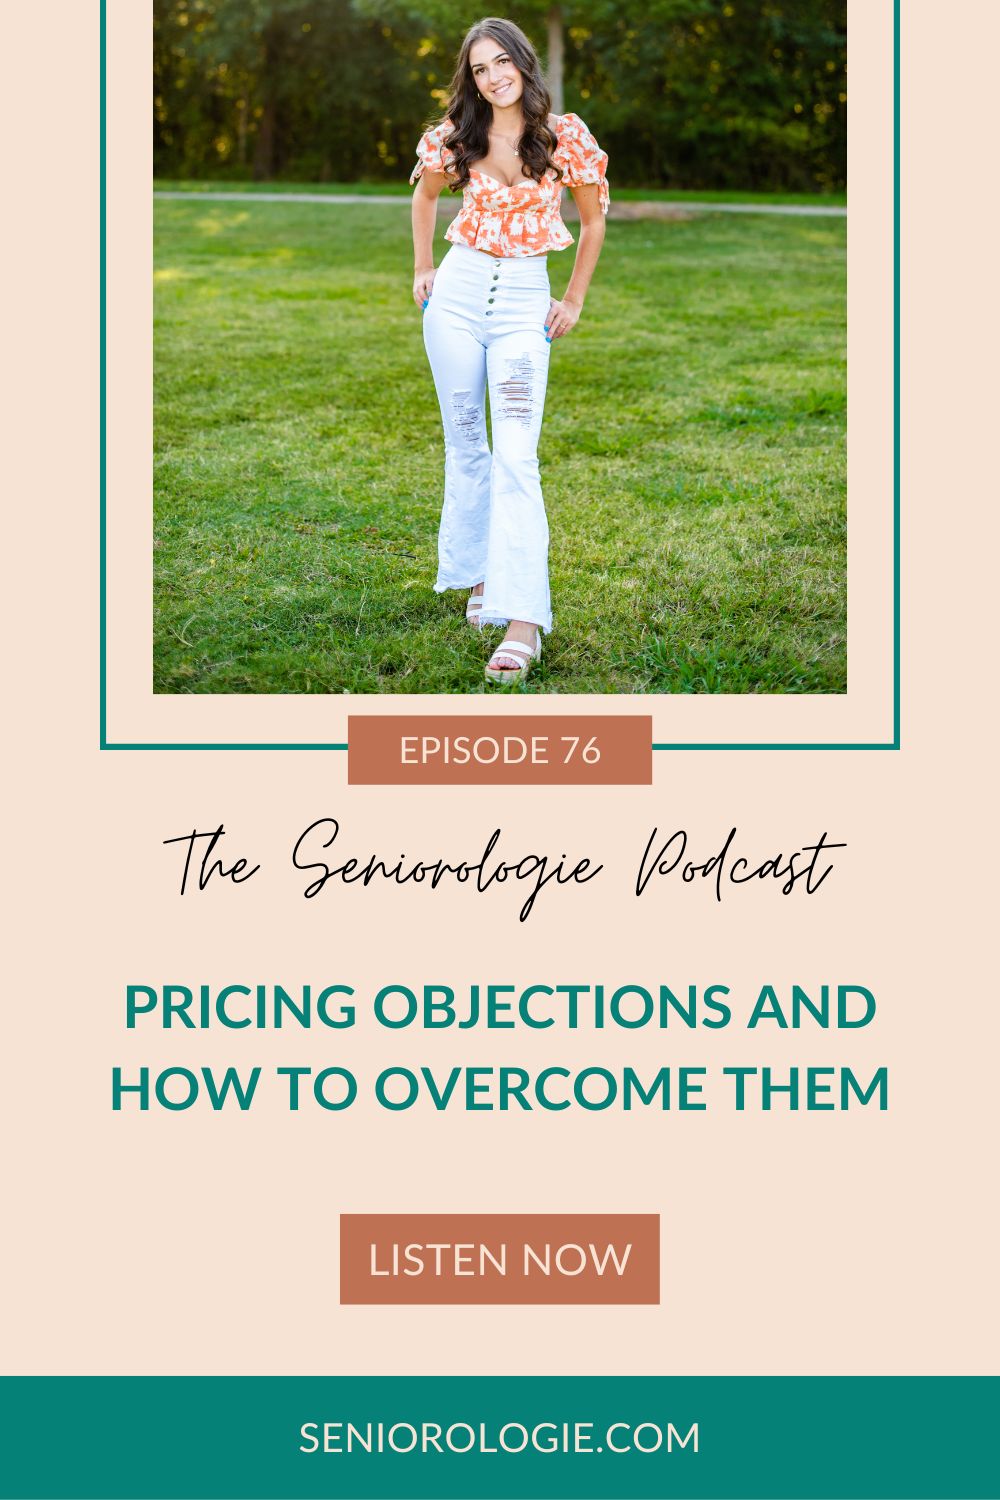 how to overcome objections from senior photography clients